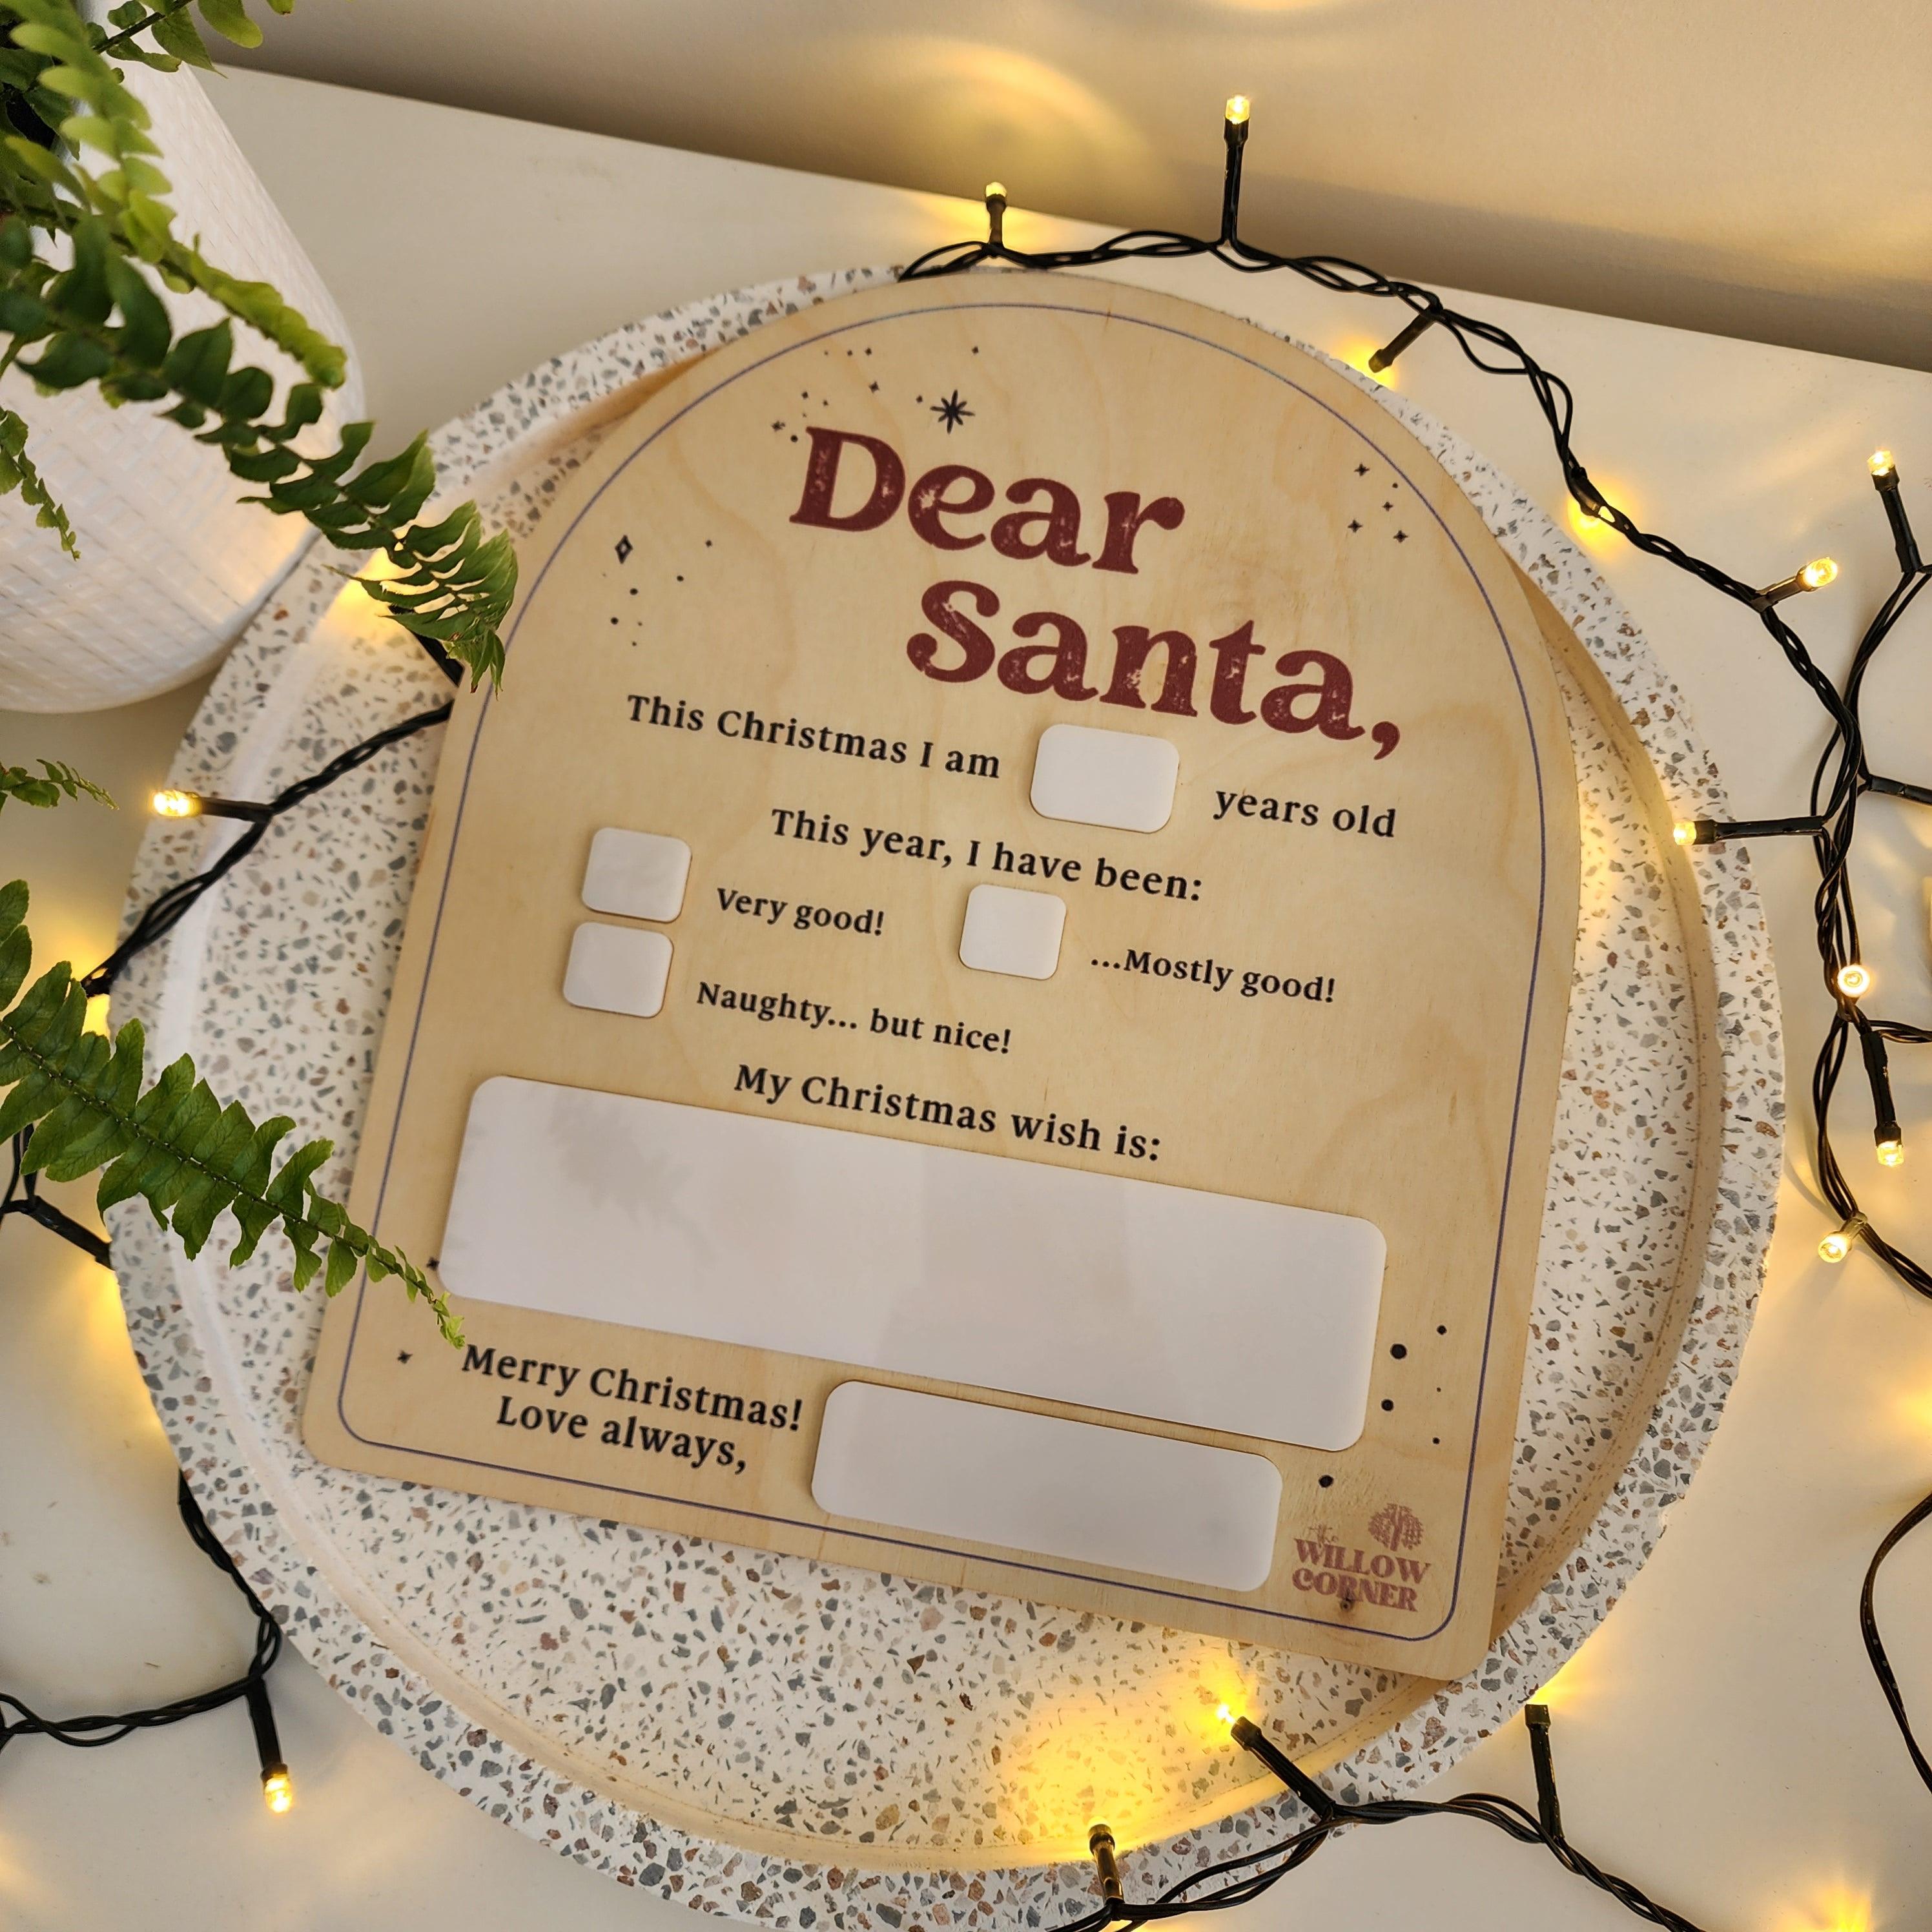 Dear Santa Wooden Arch Board - Reusable Letter to Santa Christmas Decoration - The Willow Corner